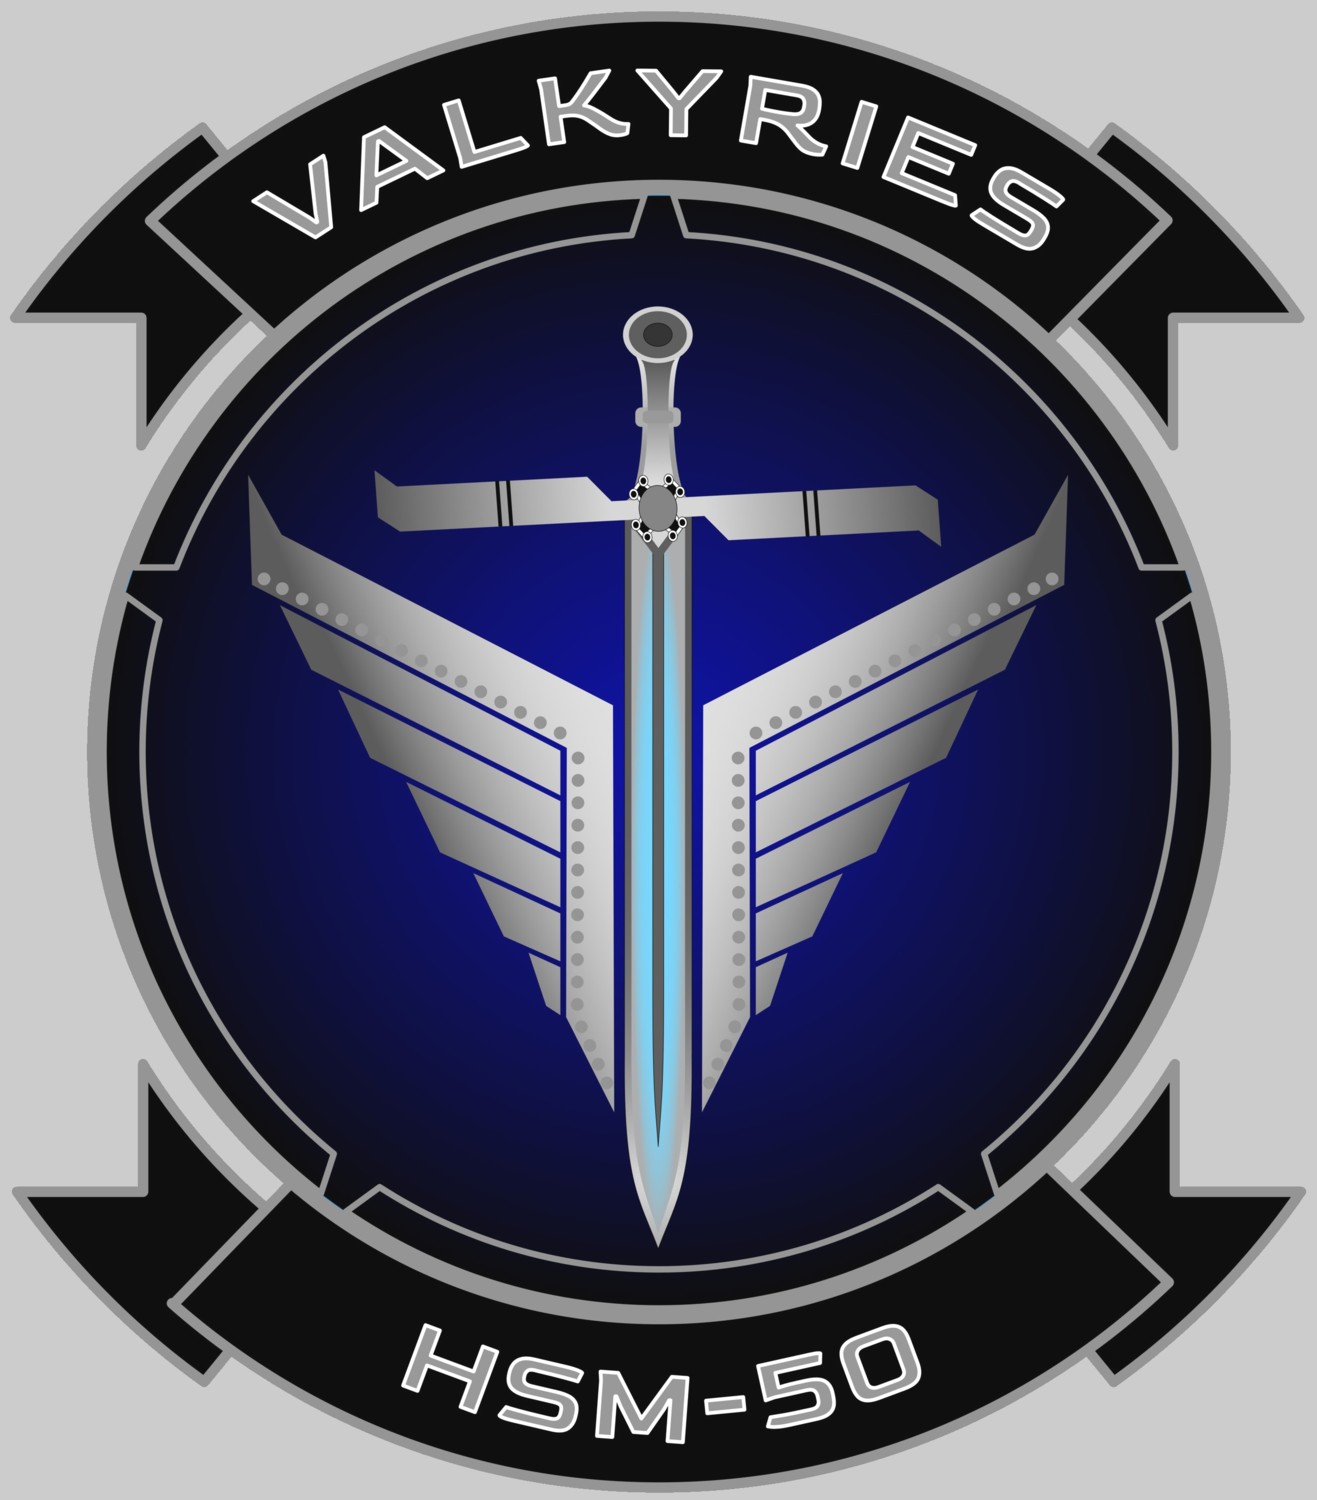 hsm-50 valkyries insignia crest patch badge helicopter maritime strike squadron us navy 02x